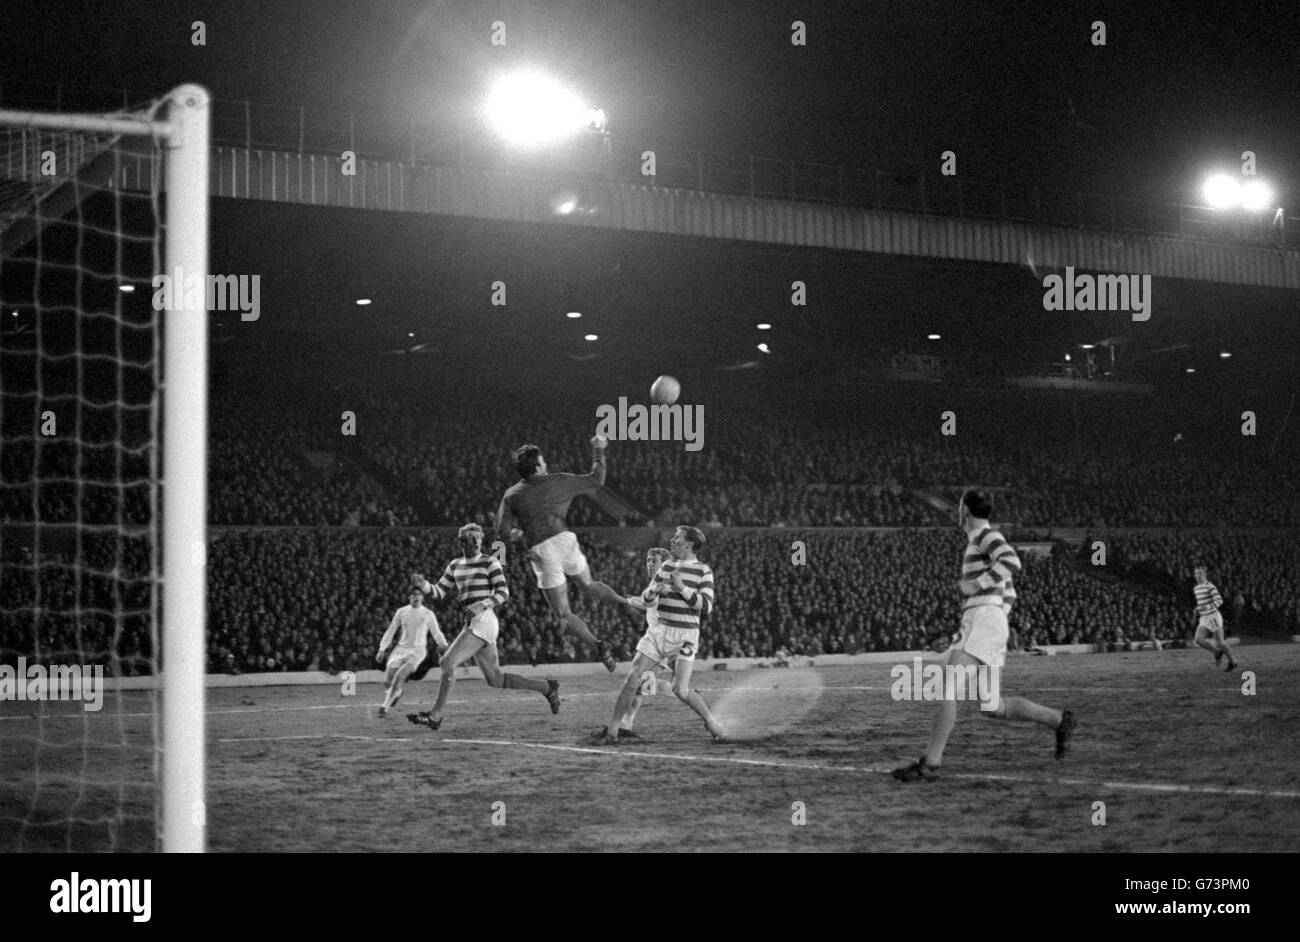 Williams, Celtic goalkeeper, punches clear from the lurking menace of Leeds leader Jones (hidden behind McNeill, right) in the European Cup semi-final, first leg at Elland Road, Leeds. At left is Celtic's Gemmell. Celtic won 1-0. Stock Photo